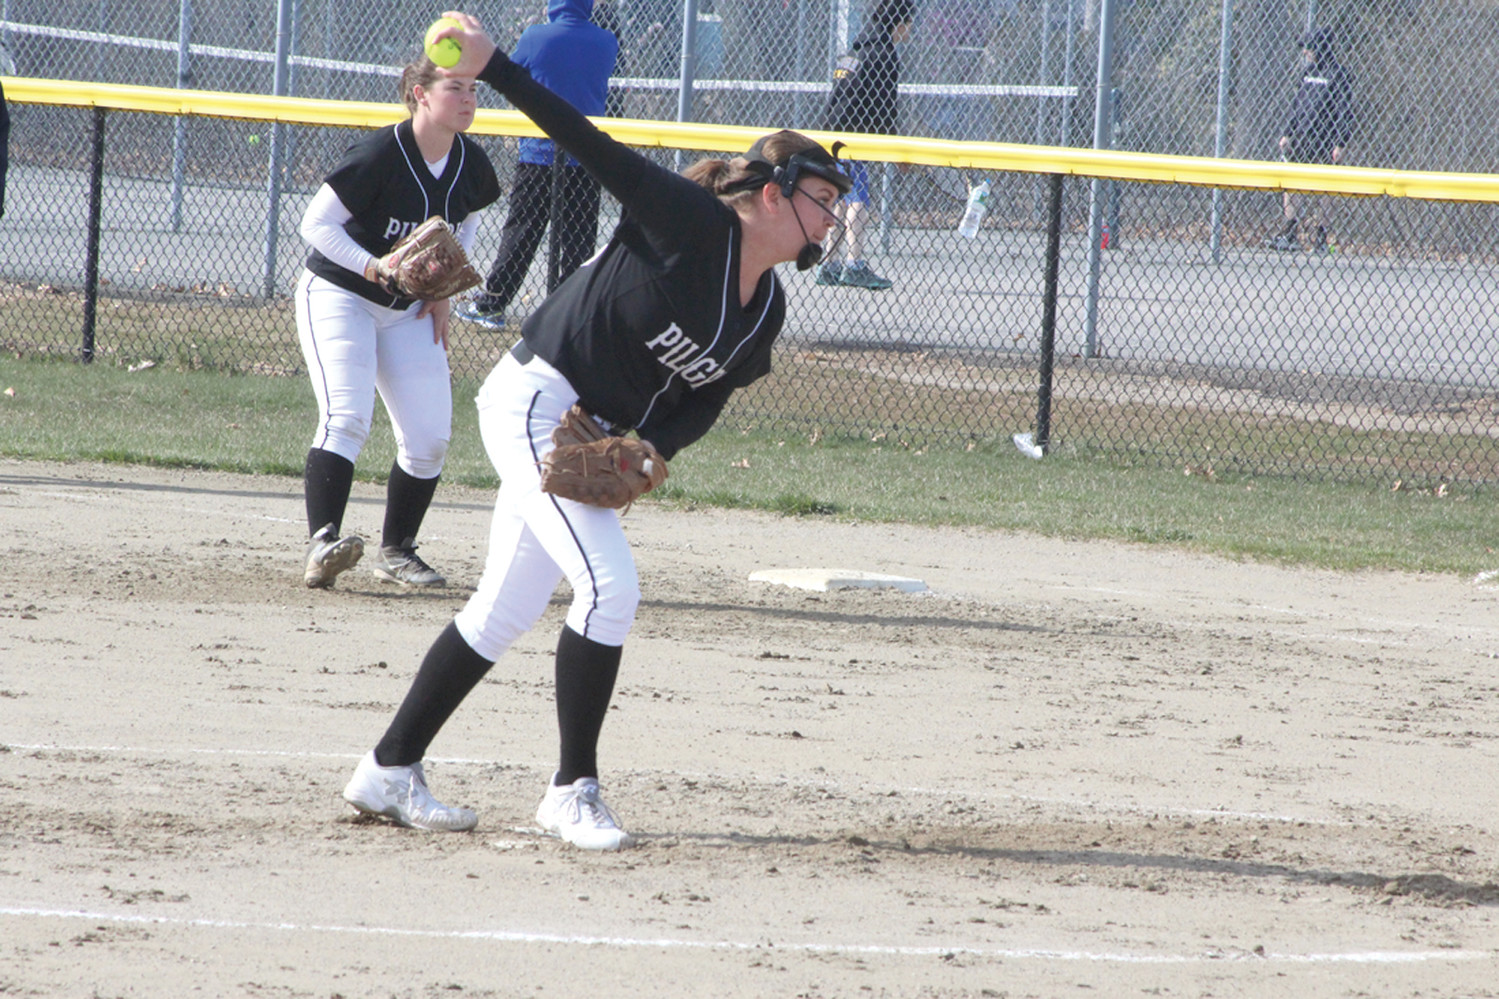 GIVING IT HER ALL: Emily Carter pitched all seven innings for the Patriots against the Quakers, keeping them in the game all the way until the last inning , when Moses Brown’s Liv Murray hit a go-ahead two-run double.